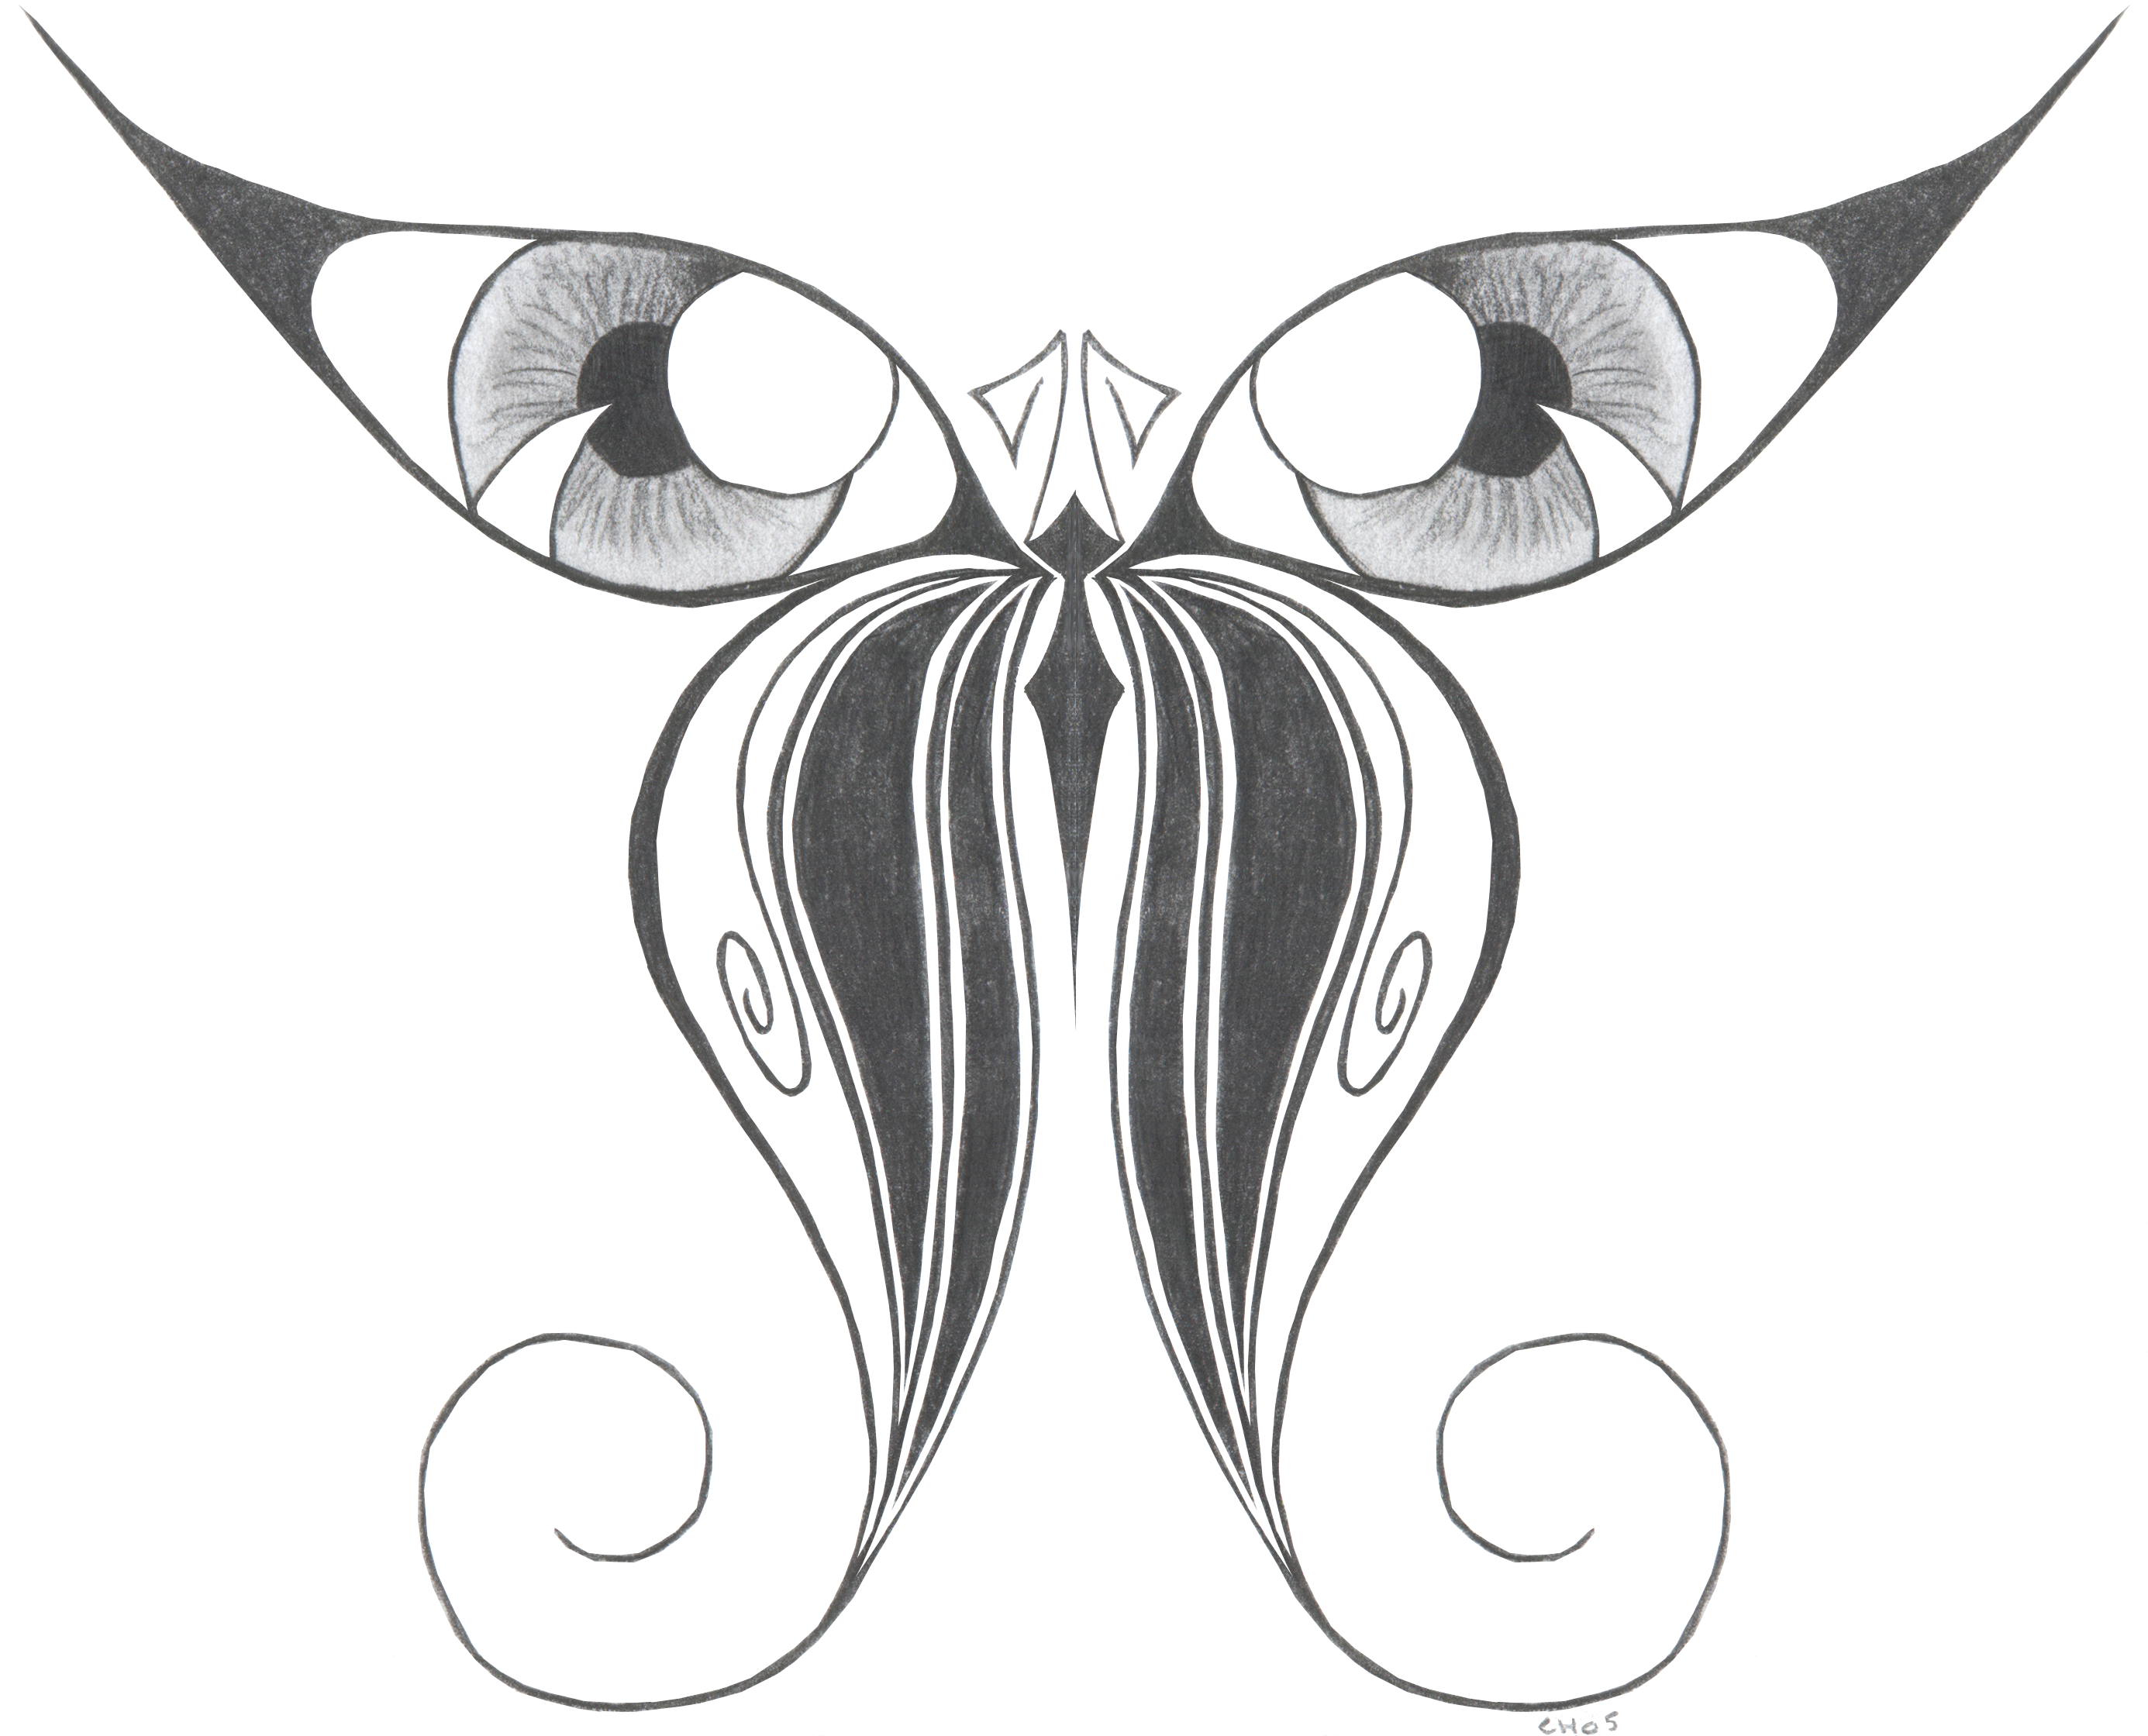 Butterfly Sketches - ClipArt Best